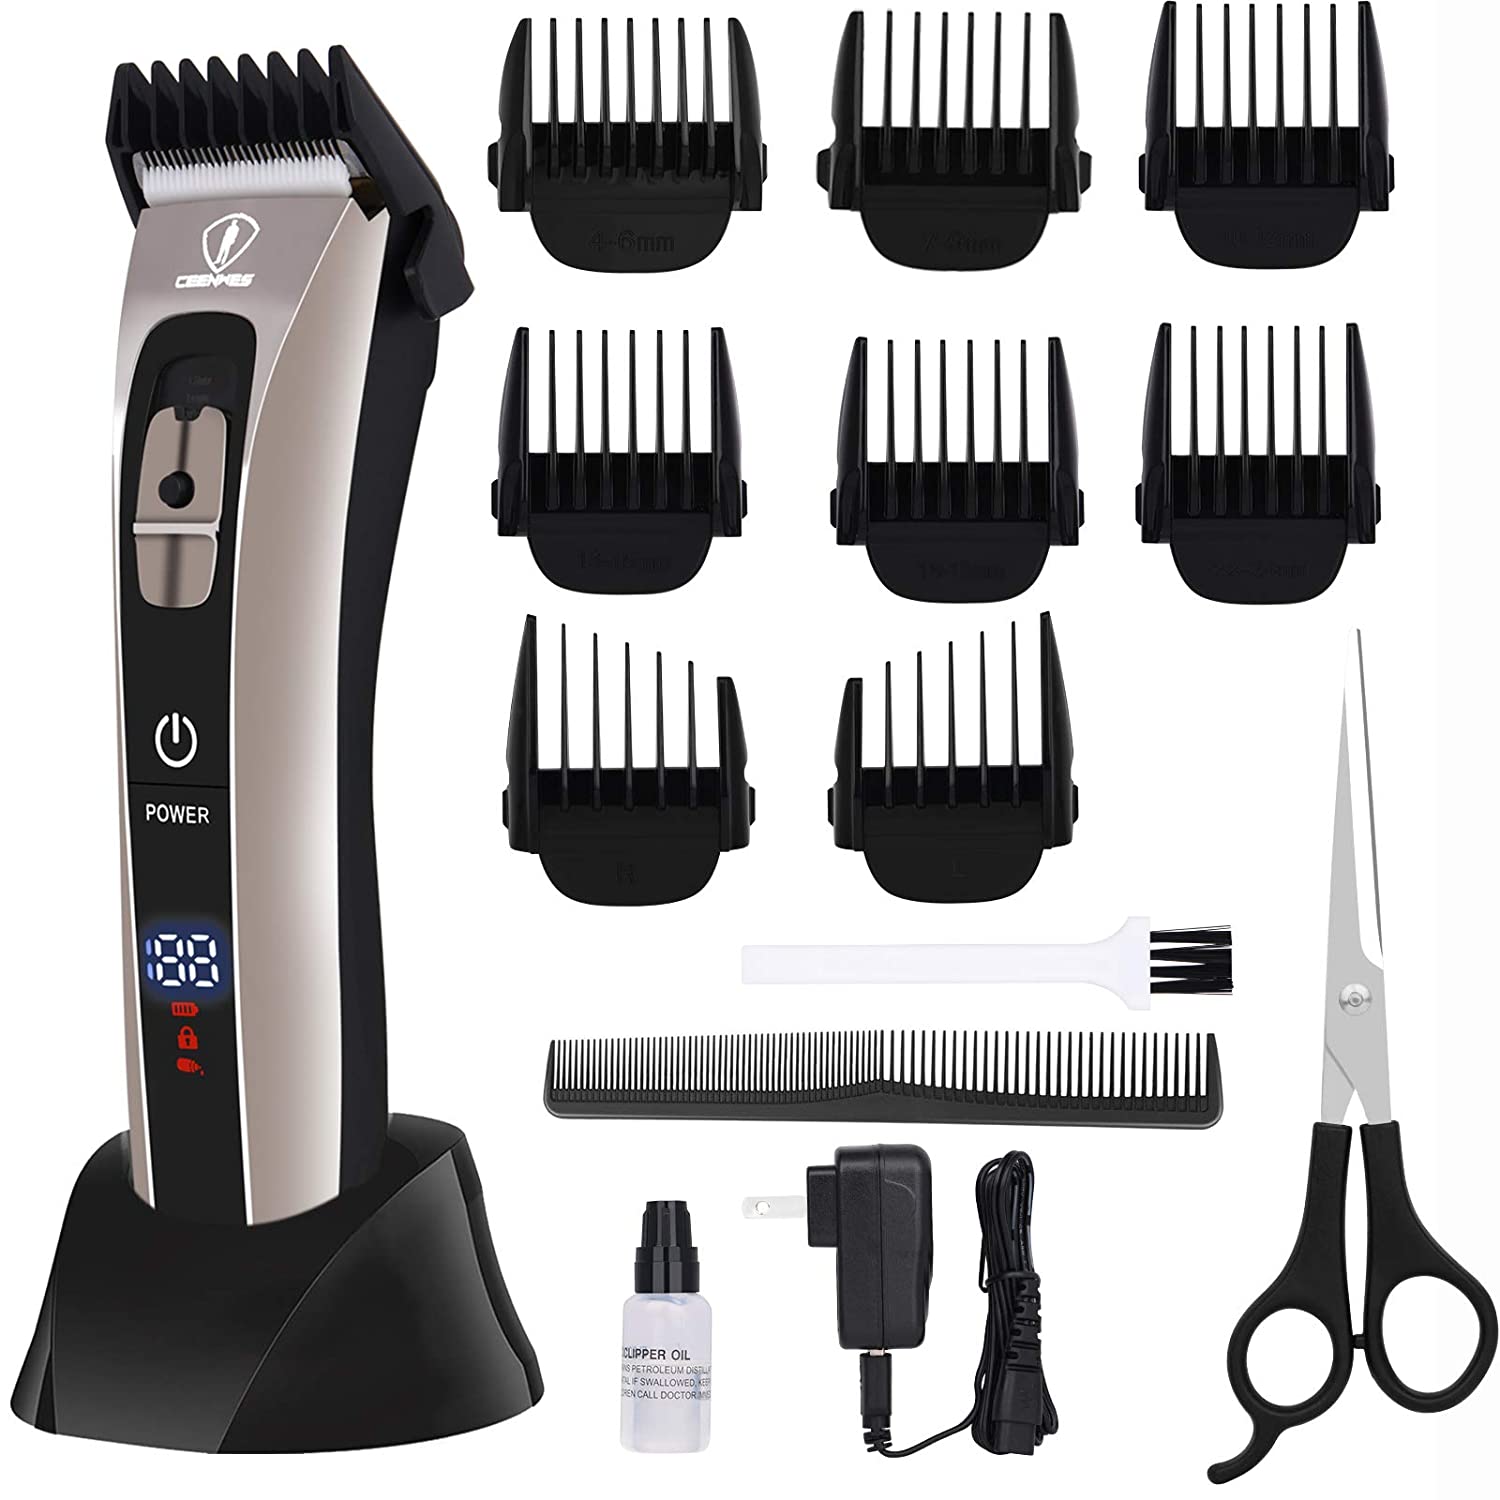 CEENWES Hair Clippers for Men Professional Hair trimmer Waterproof Haircut Kit Beard Trimmer with LED Display Rechargeable Hair Removal Cordless Beard Grooming Kit&nbsp; - Home Decor Gifts and More